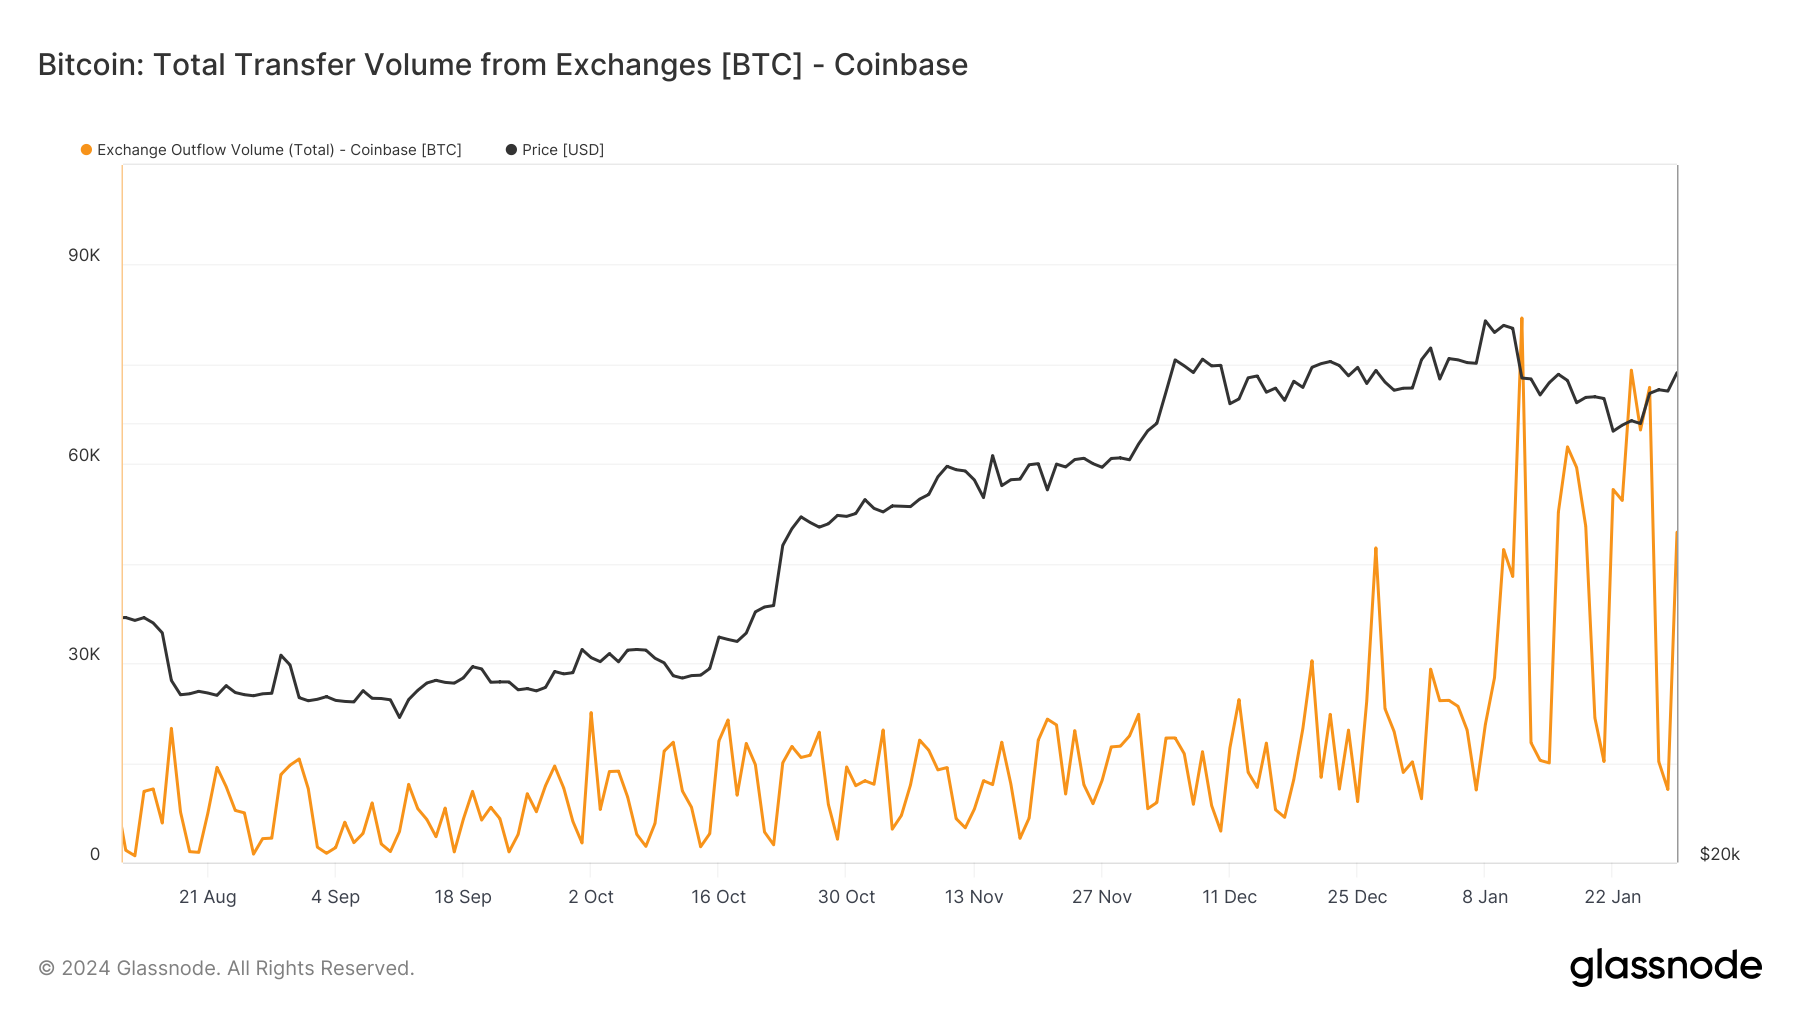 Bitcoin net outflows from Coinbase